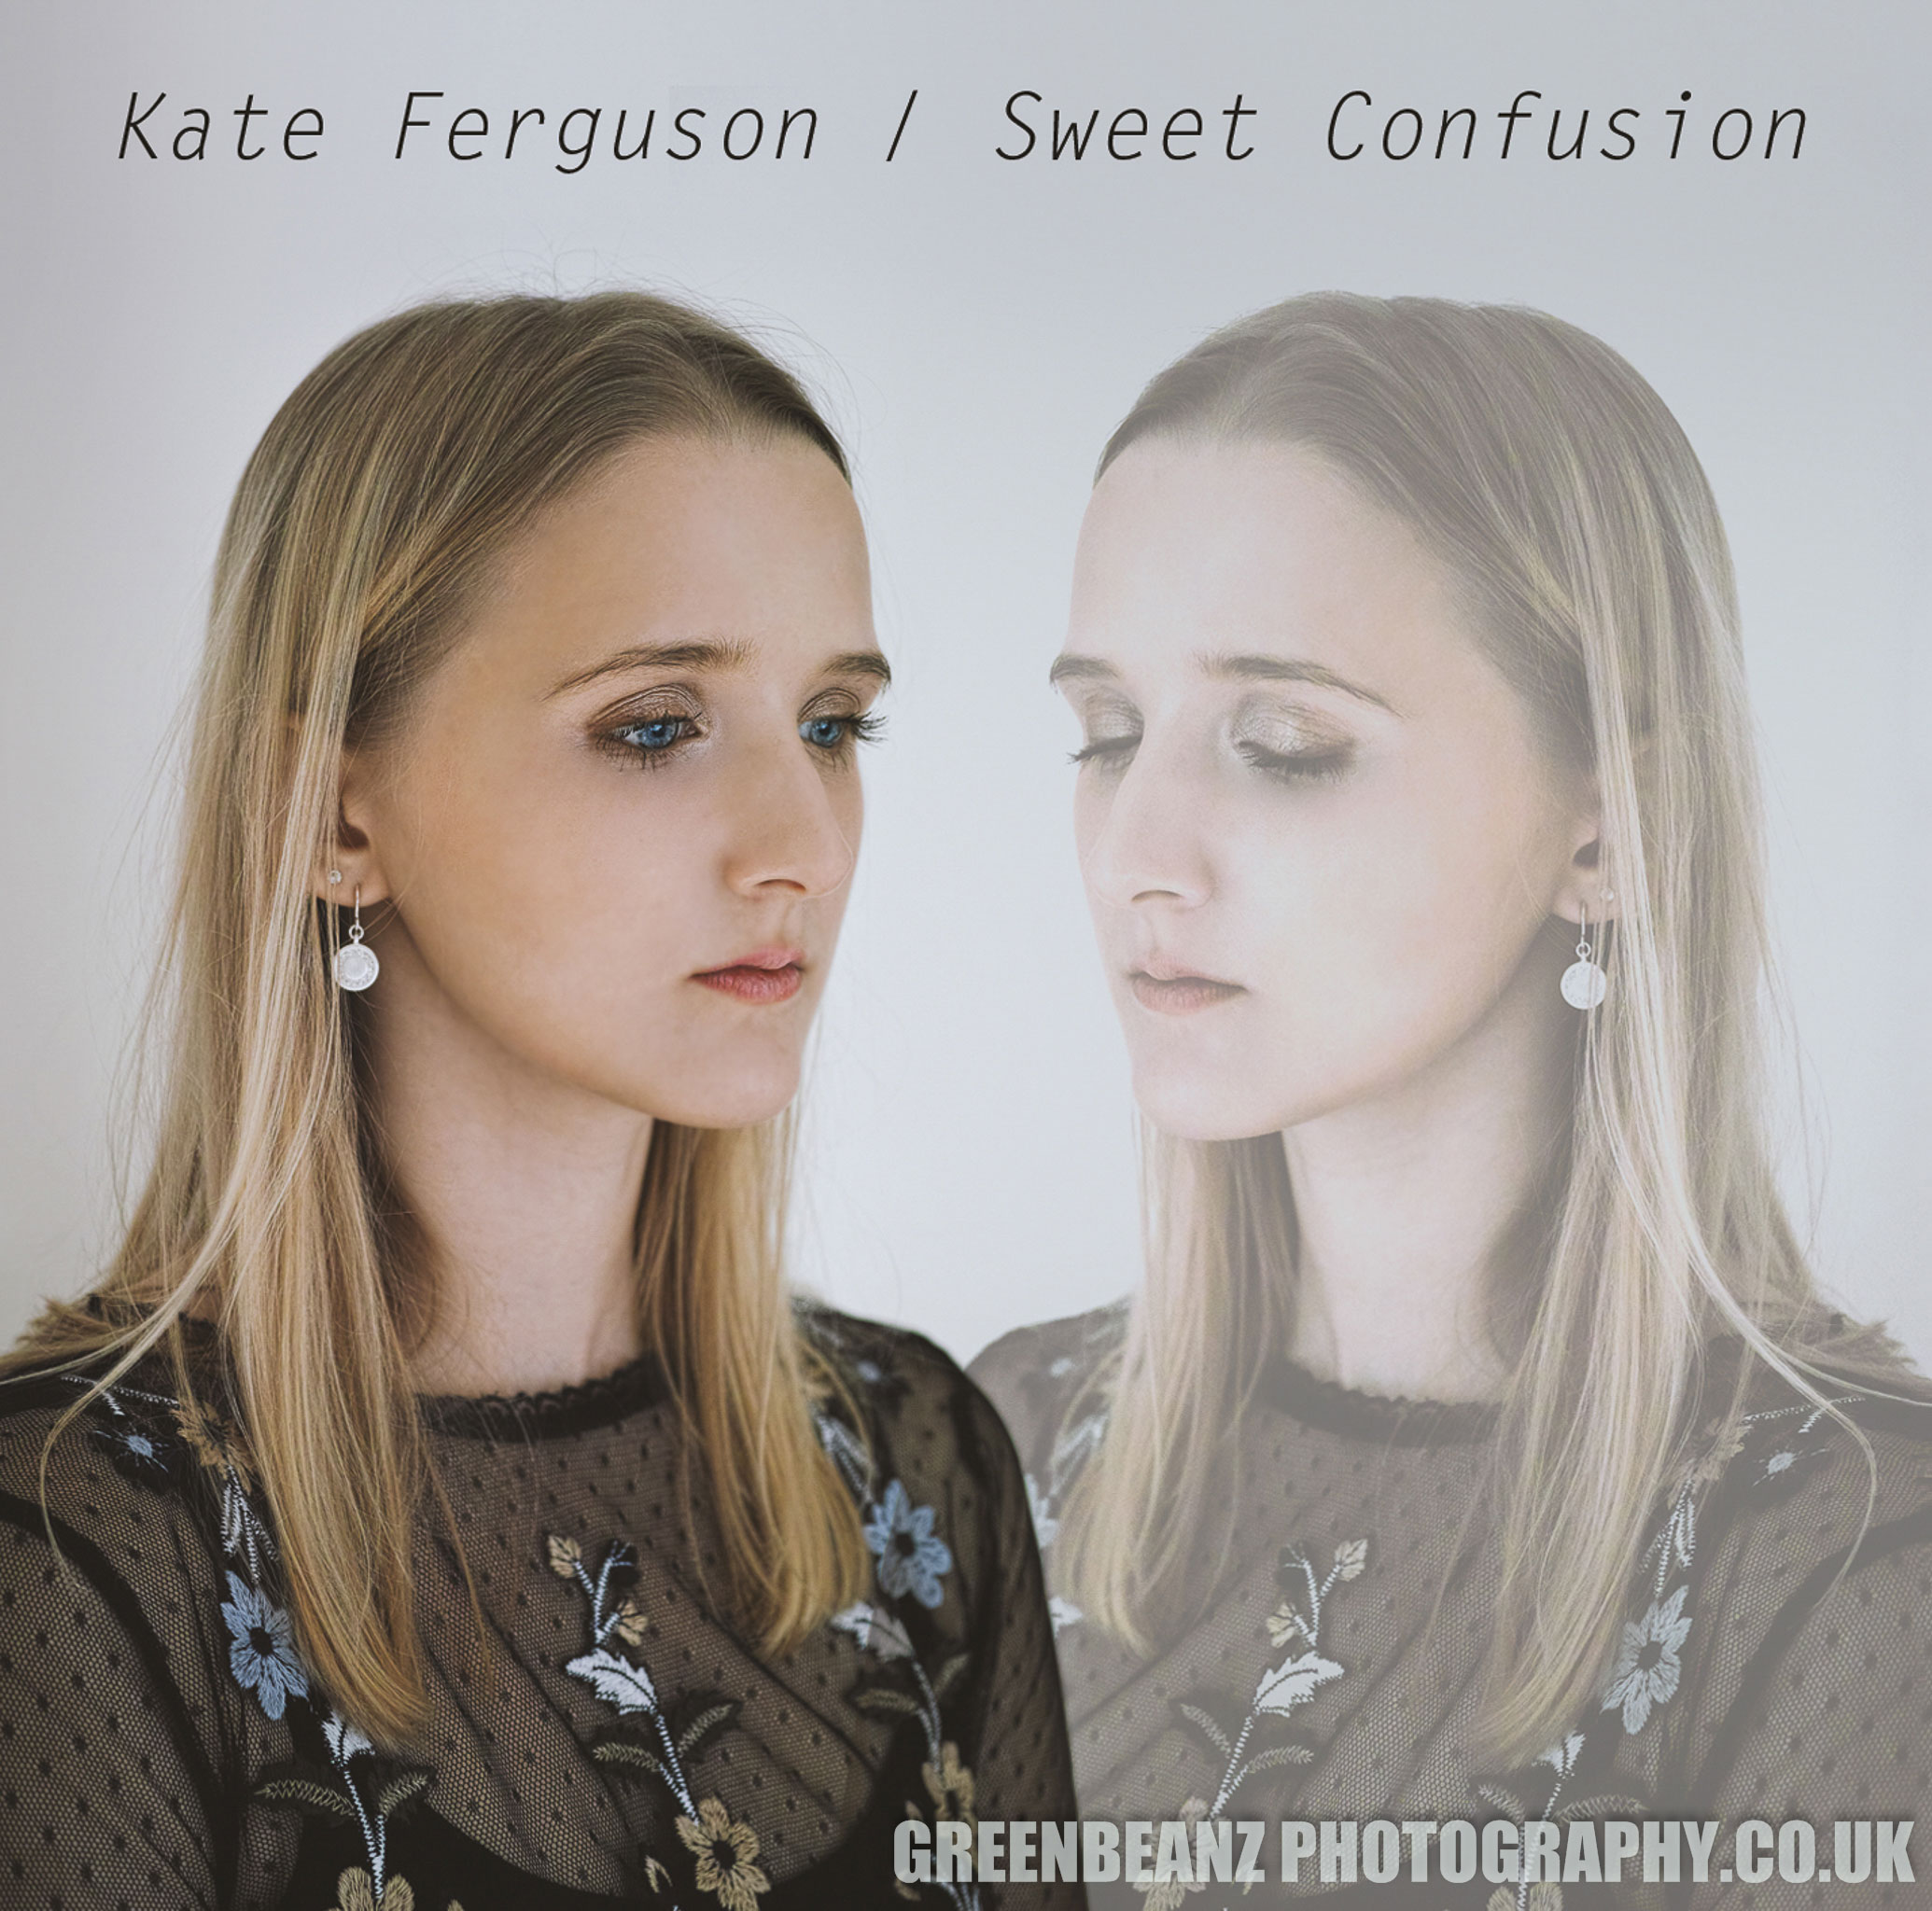 Kate Ferguson 'Sweet Confusion' UK CD artwork production in Plymouth